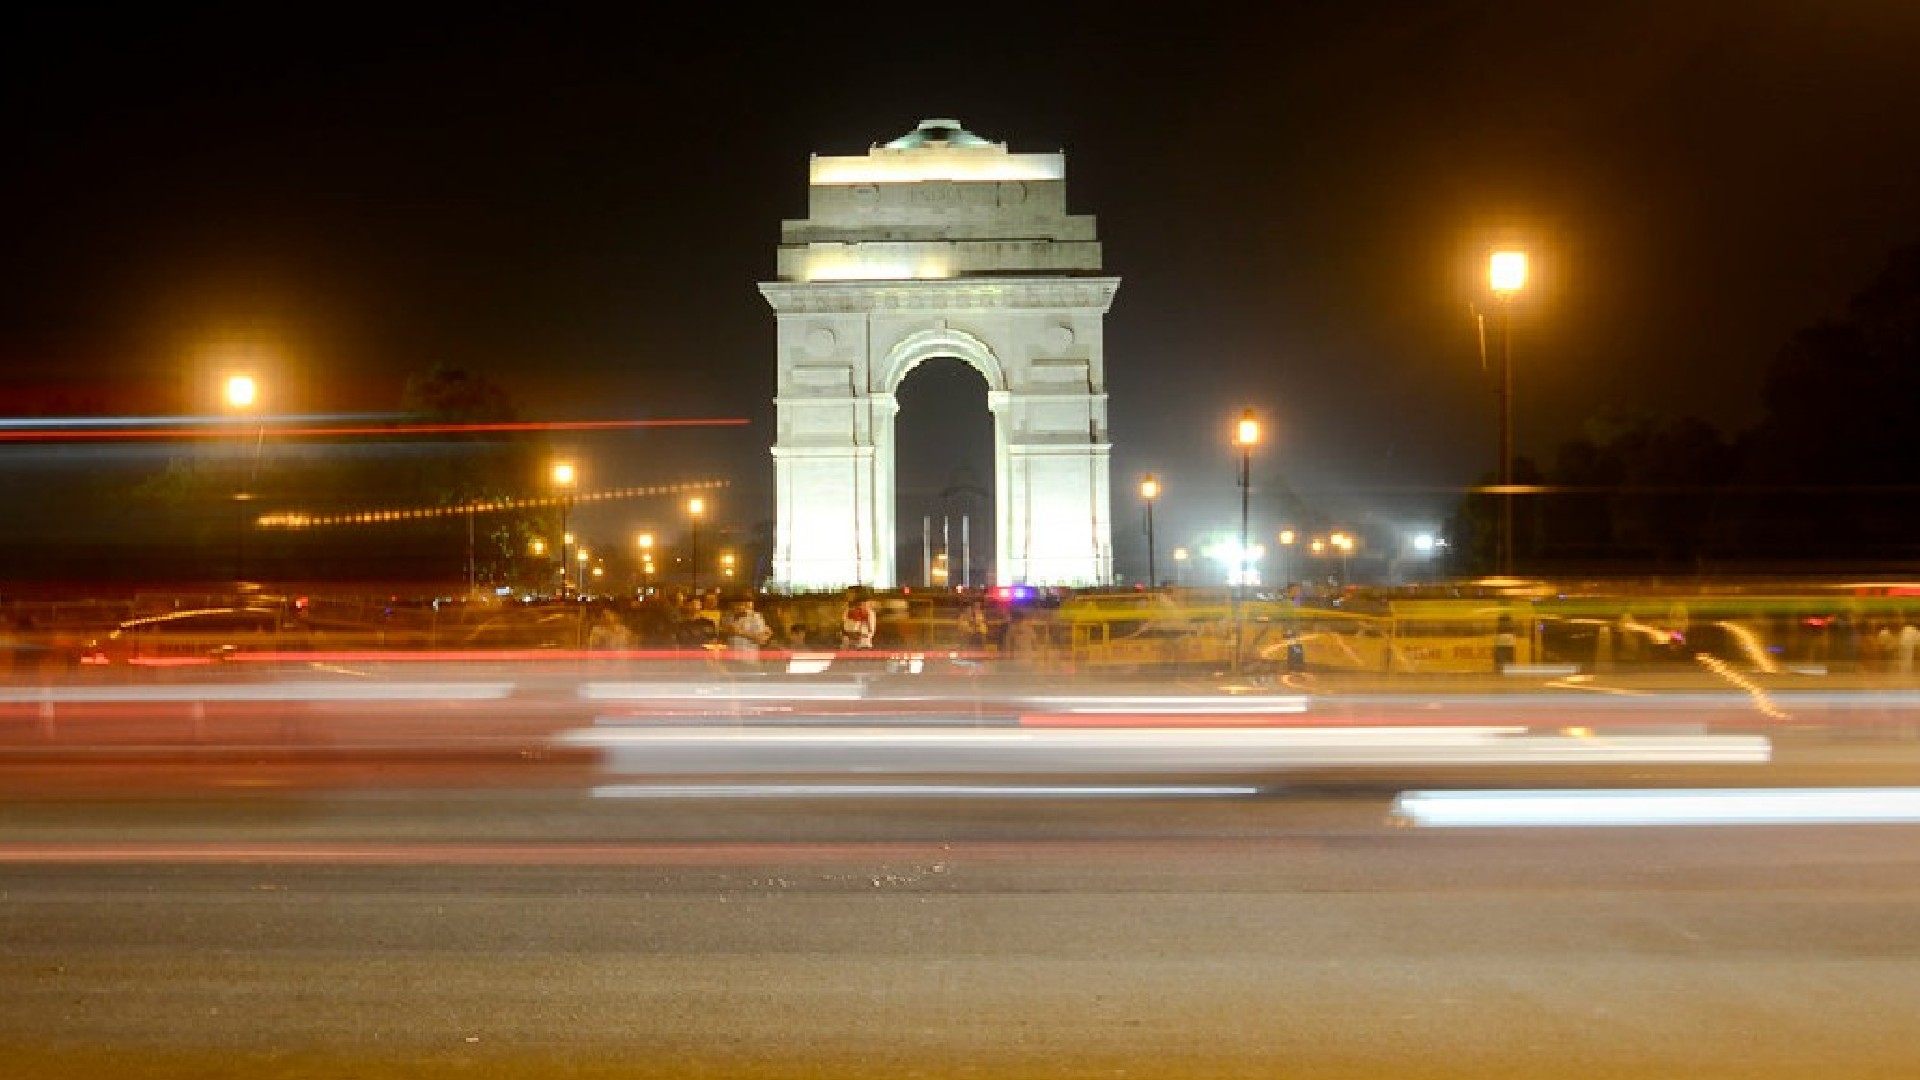 Delhi To Turn Into 24-Hr City With Bustling Nightlife Circuits As Part